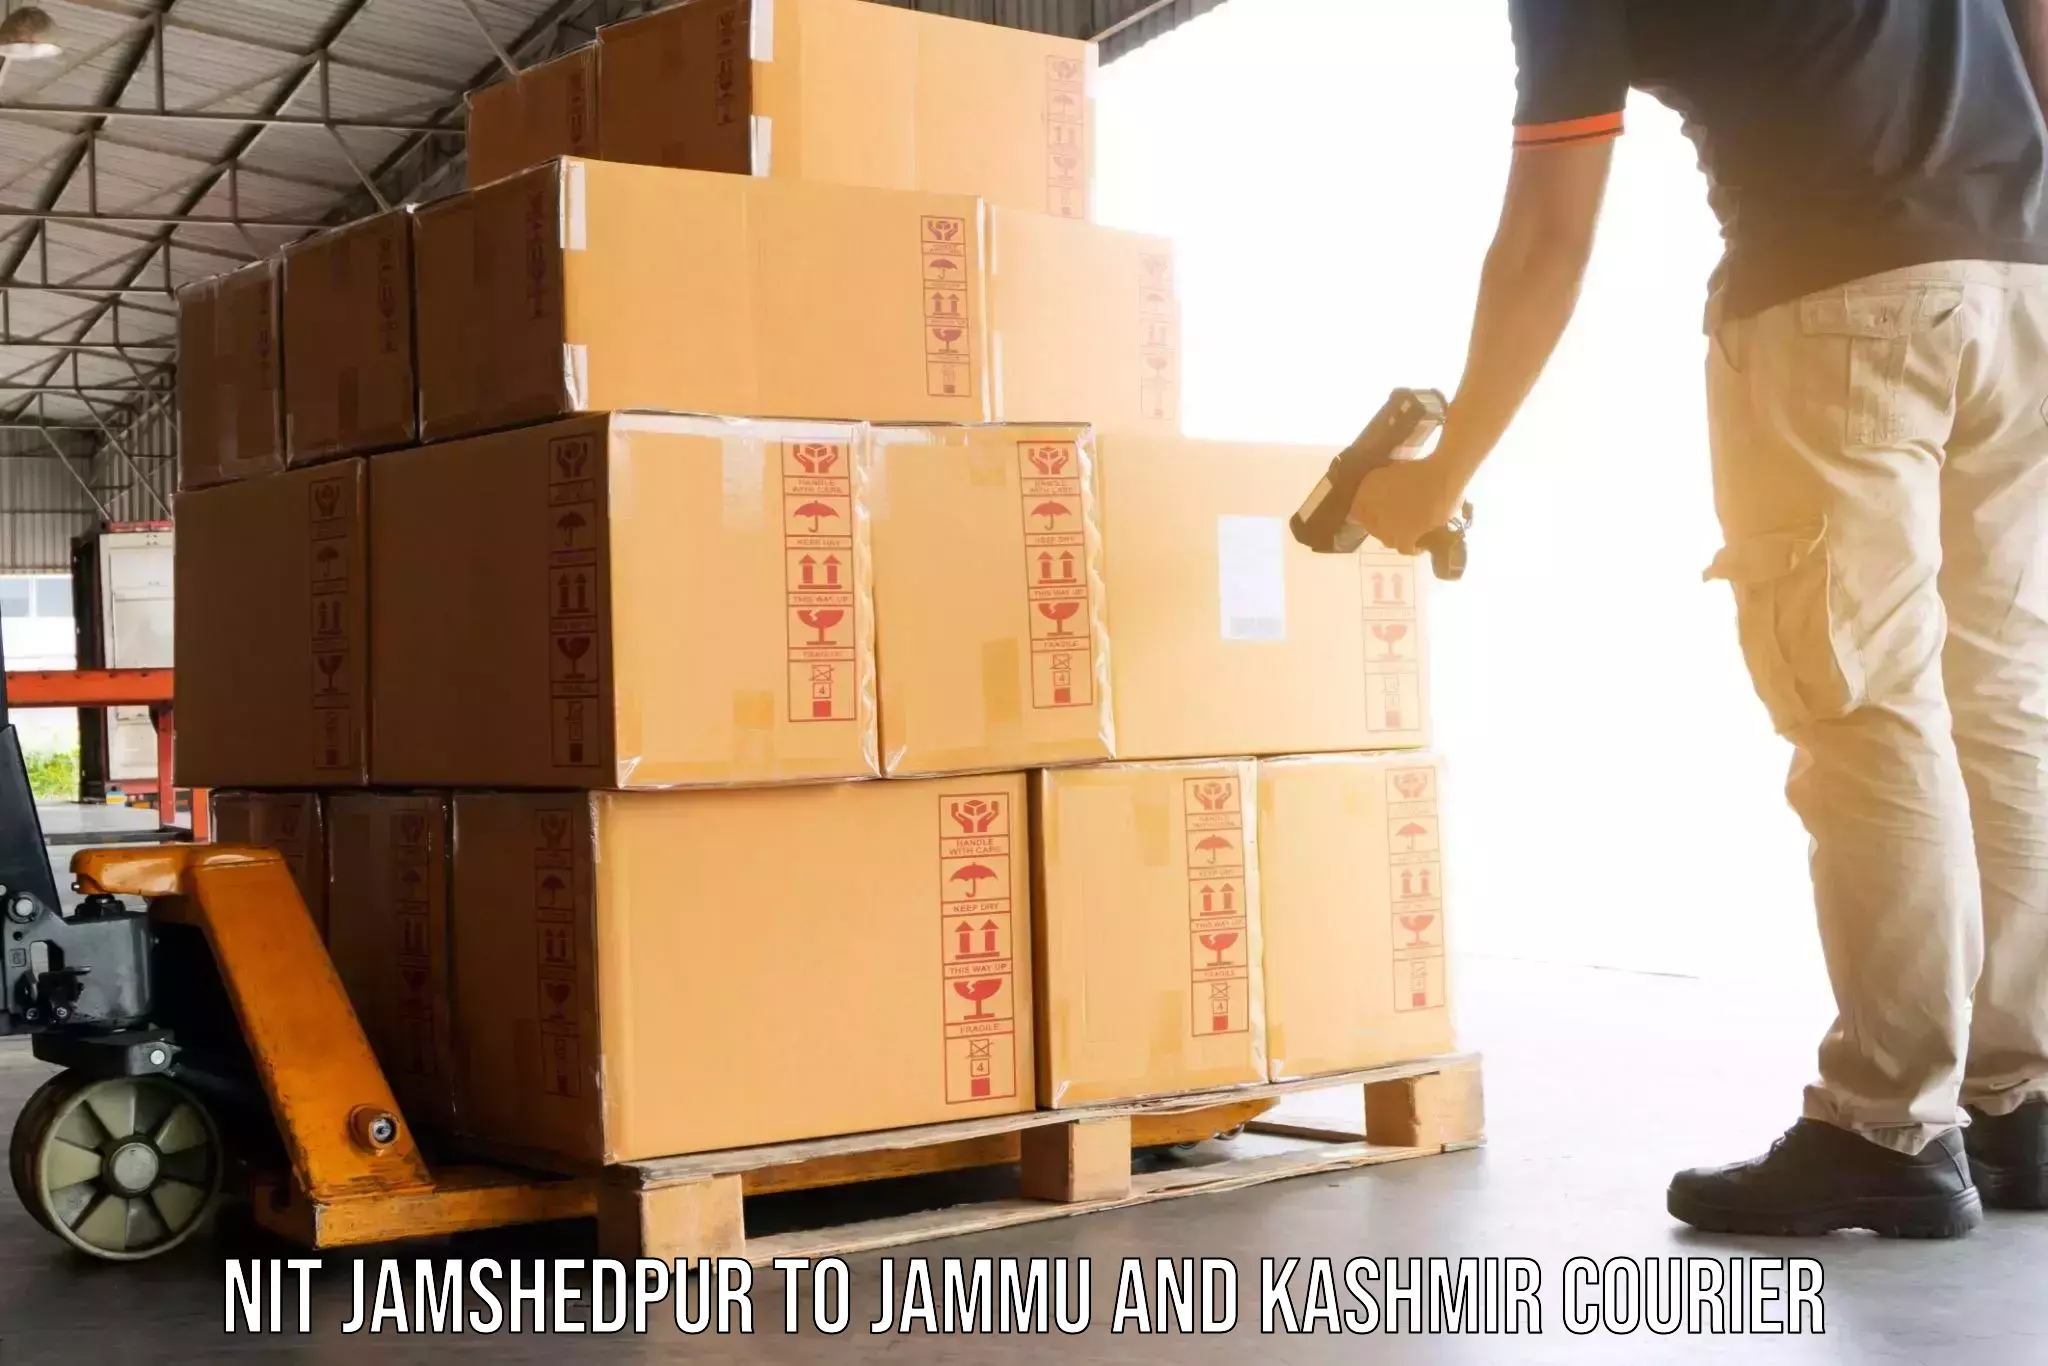 Home goods moving company NIT Jamshedpur to Jammu and Kashmir